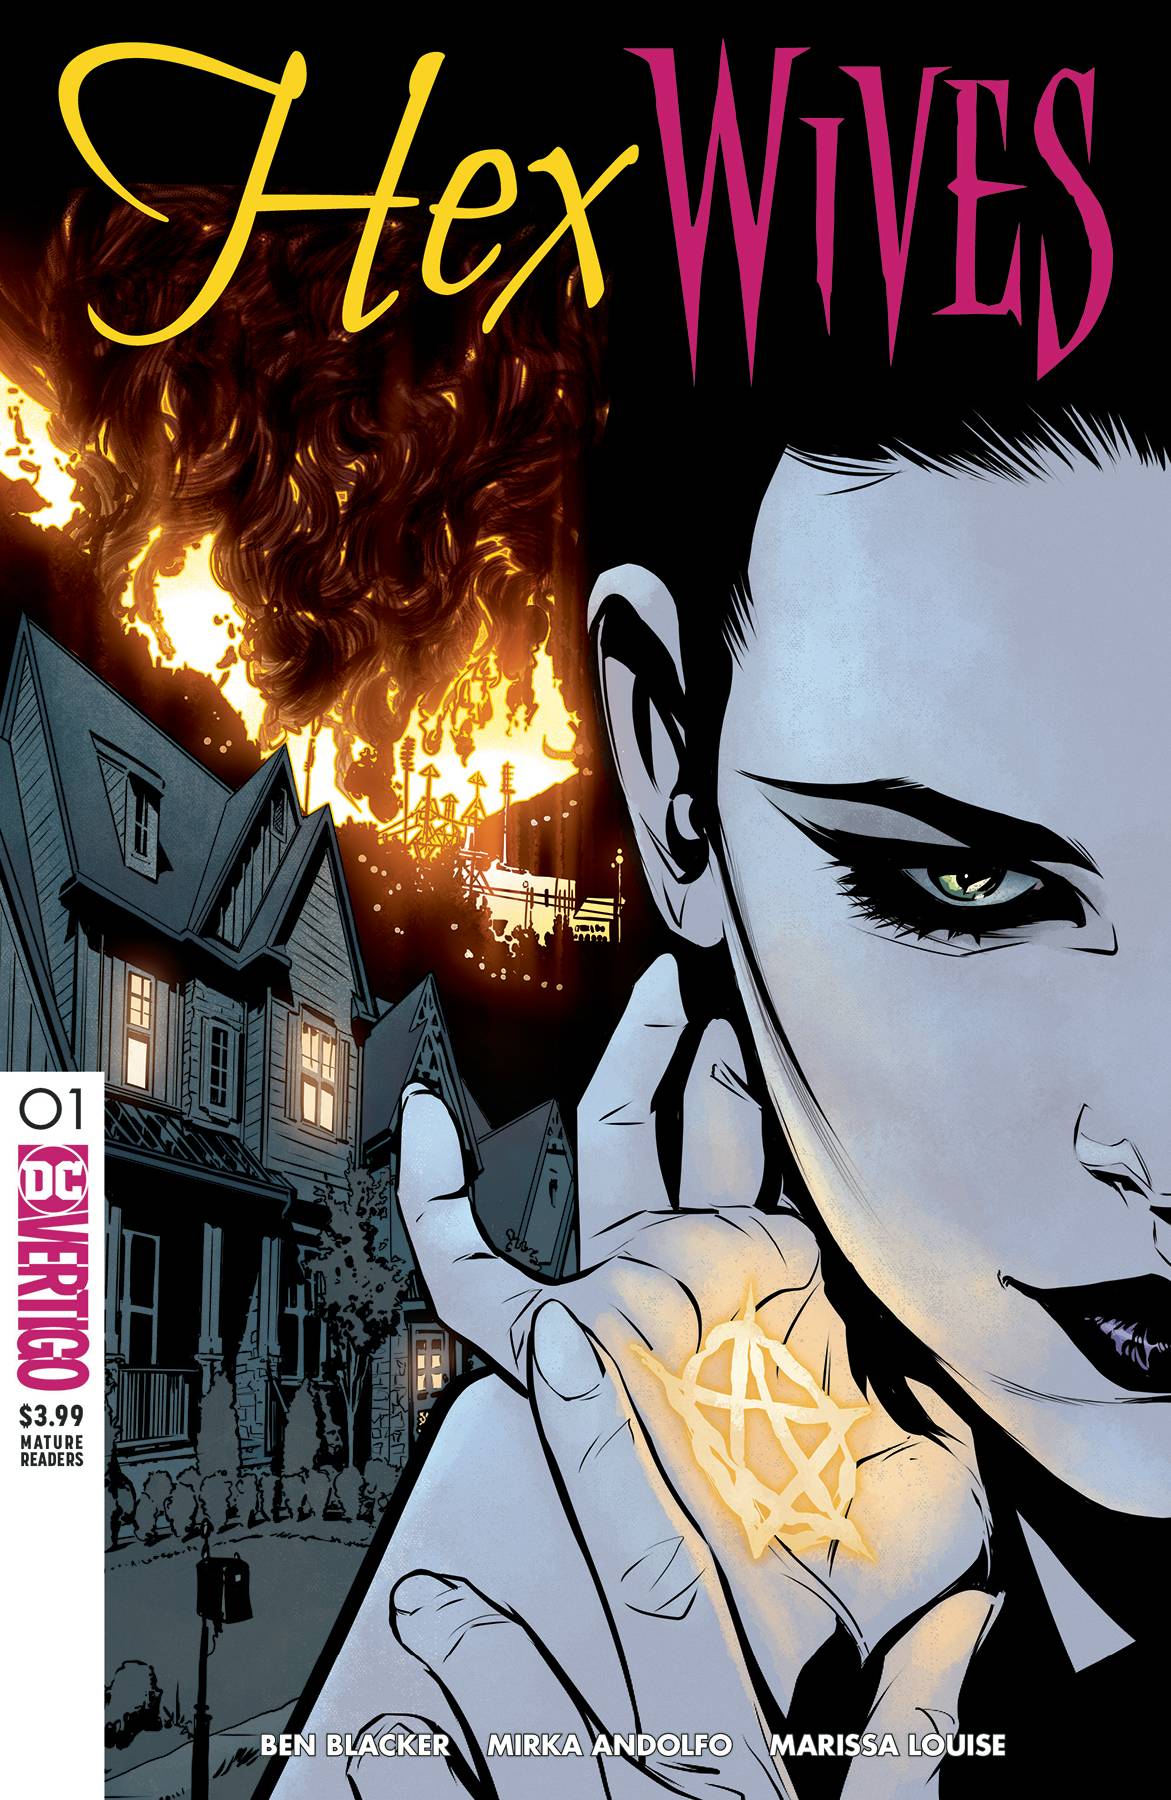 HEX WIVES #1 (MR) FOC 10/08/18